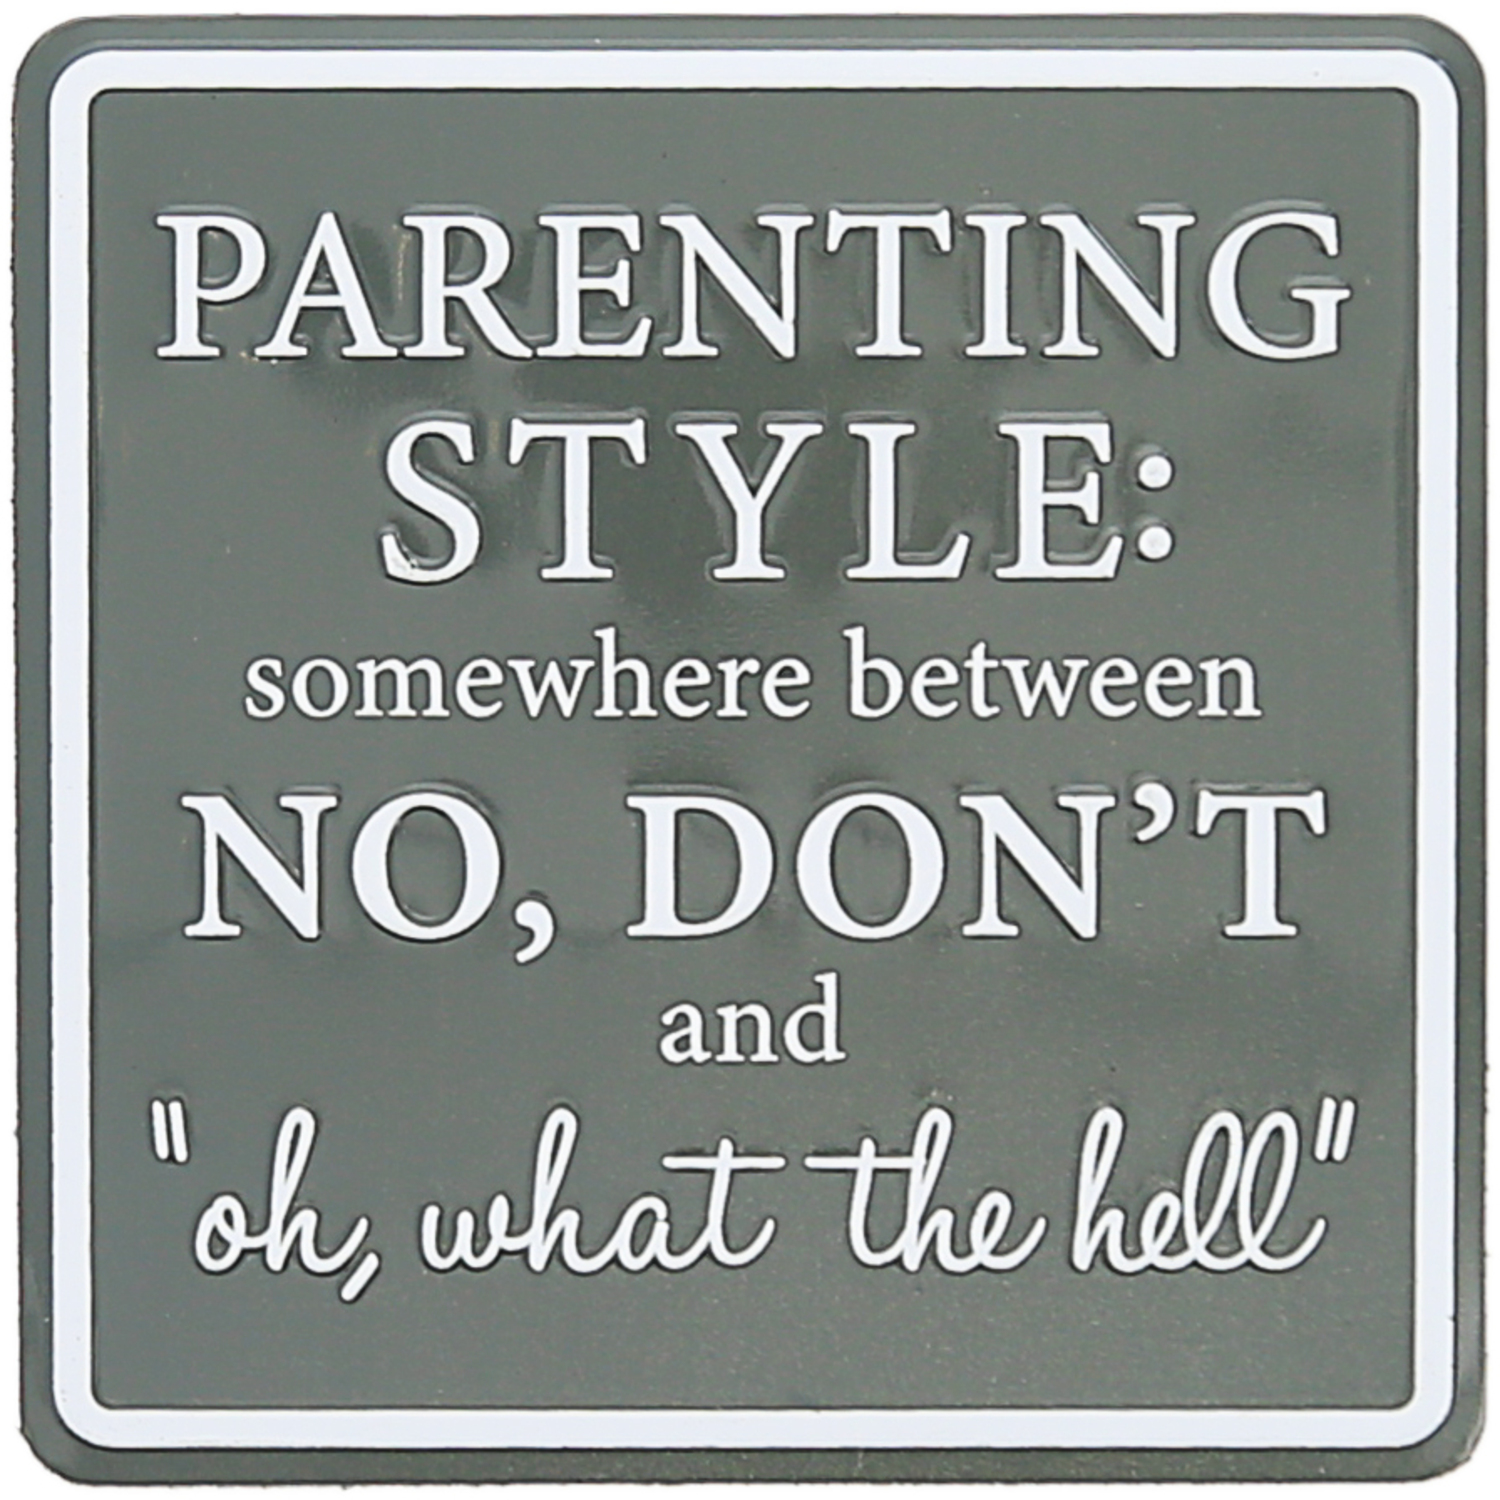 Parenting Style by A-Parent-ly - Parenting Style - 3.5" Tin Magnet